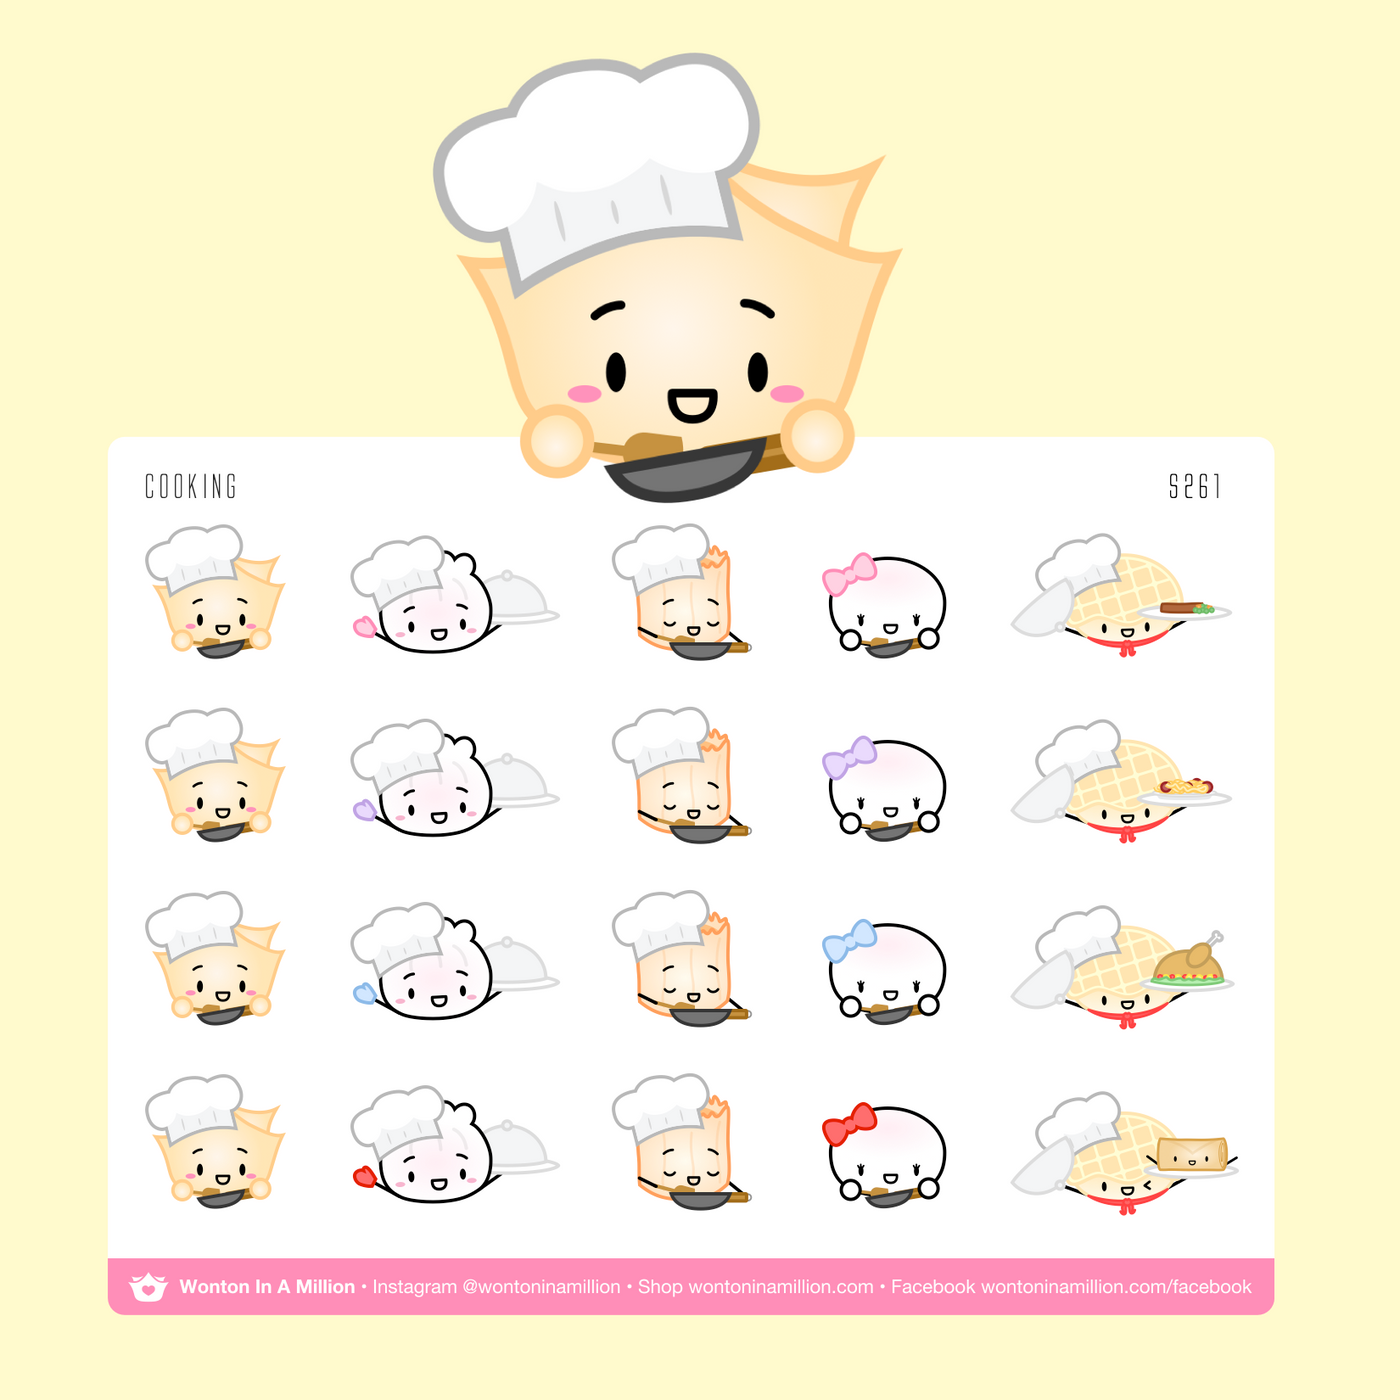 S261 | Cooking Stickers